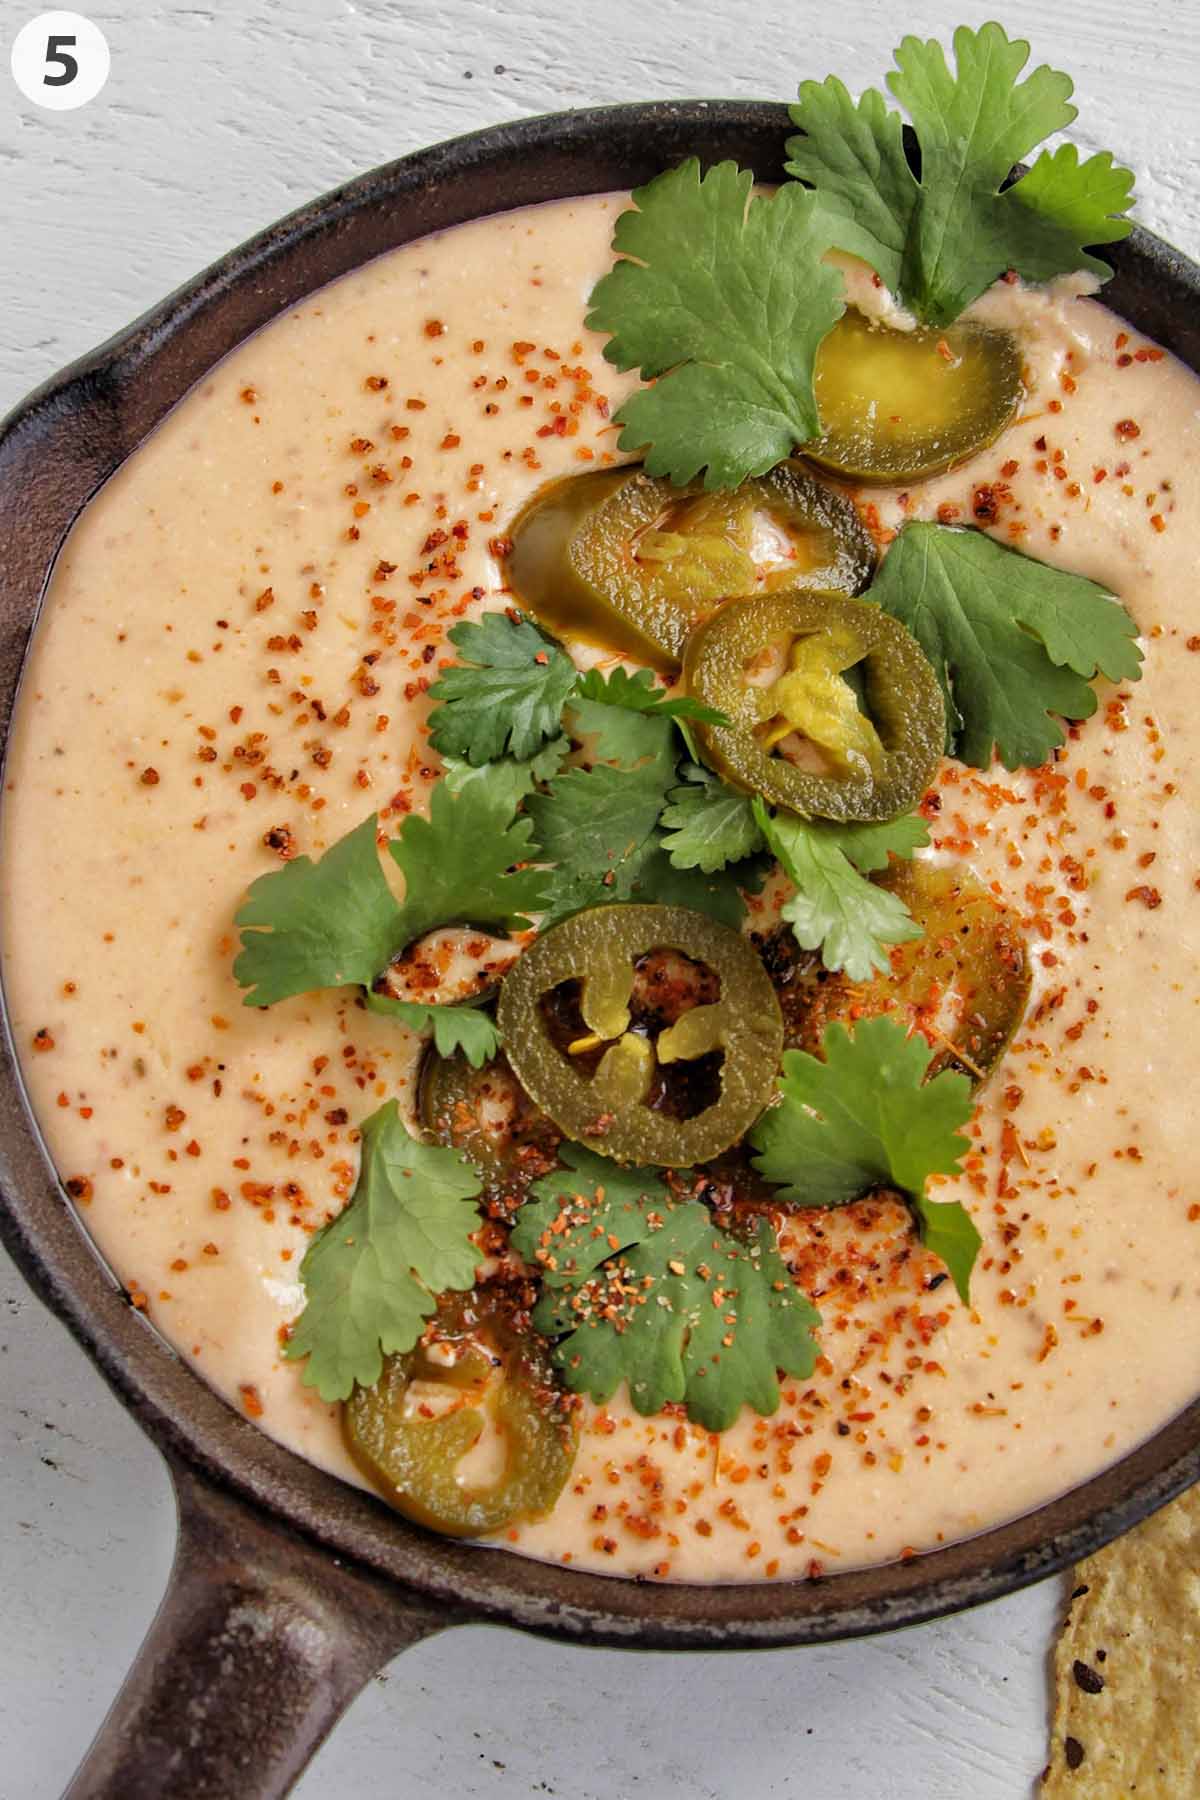 numbered photos showing queso garnished with jalapenos and cilantro.